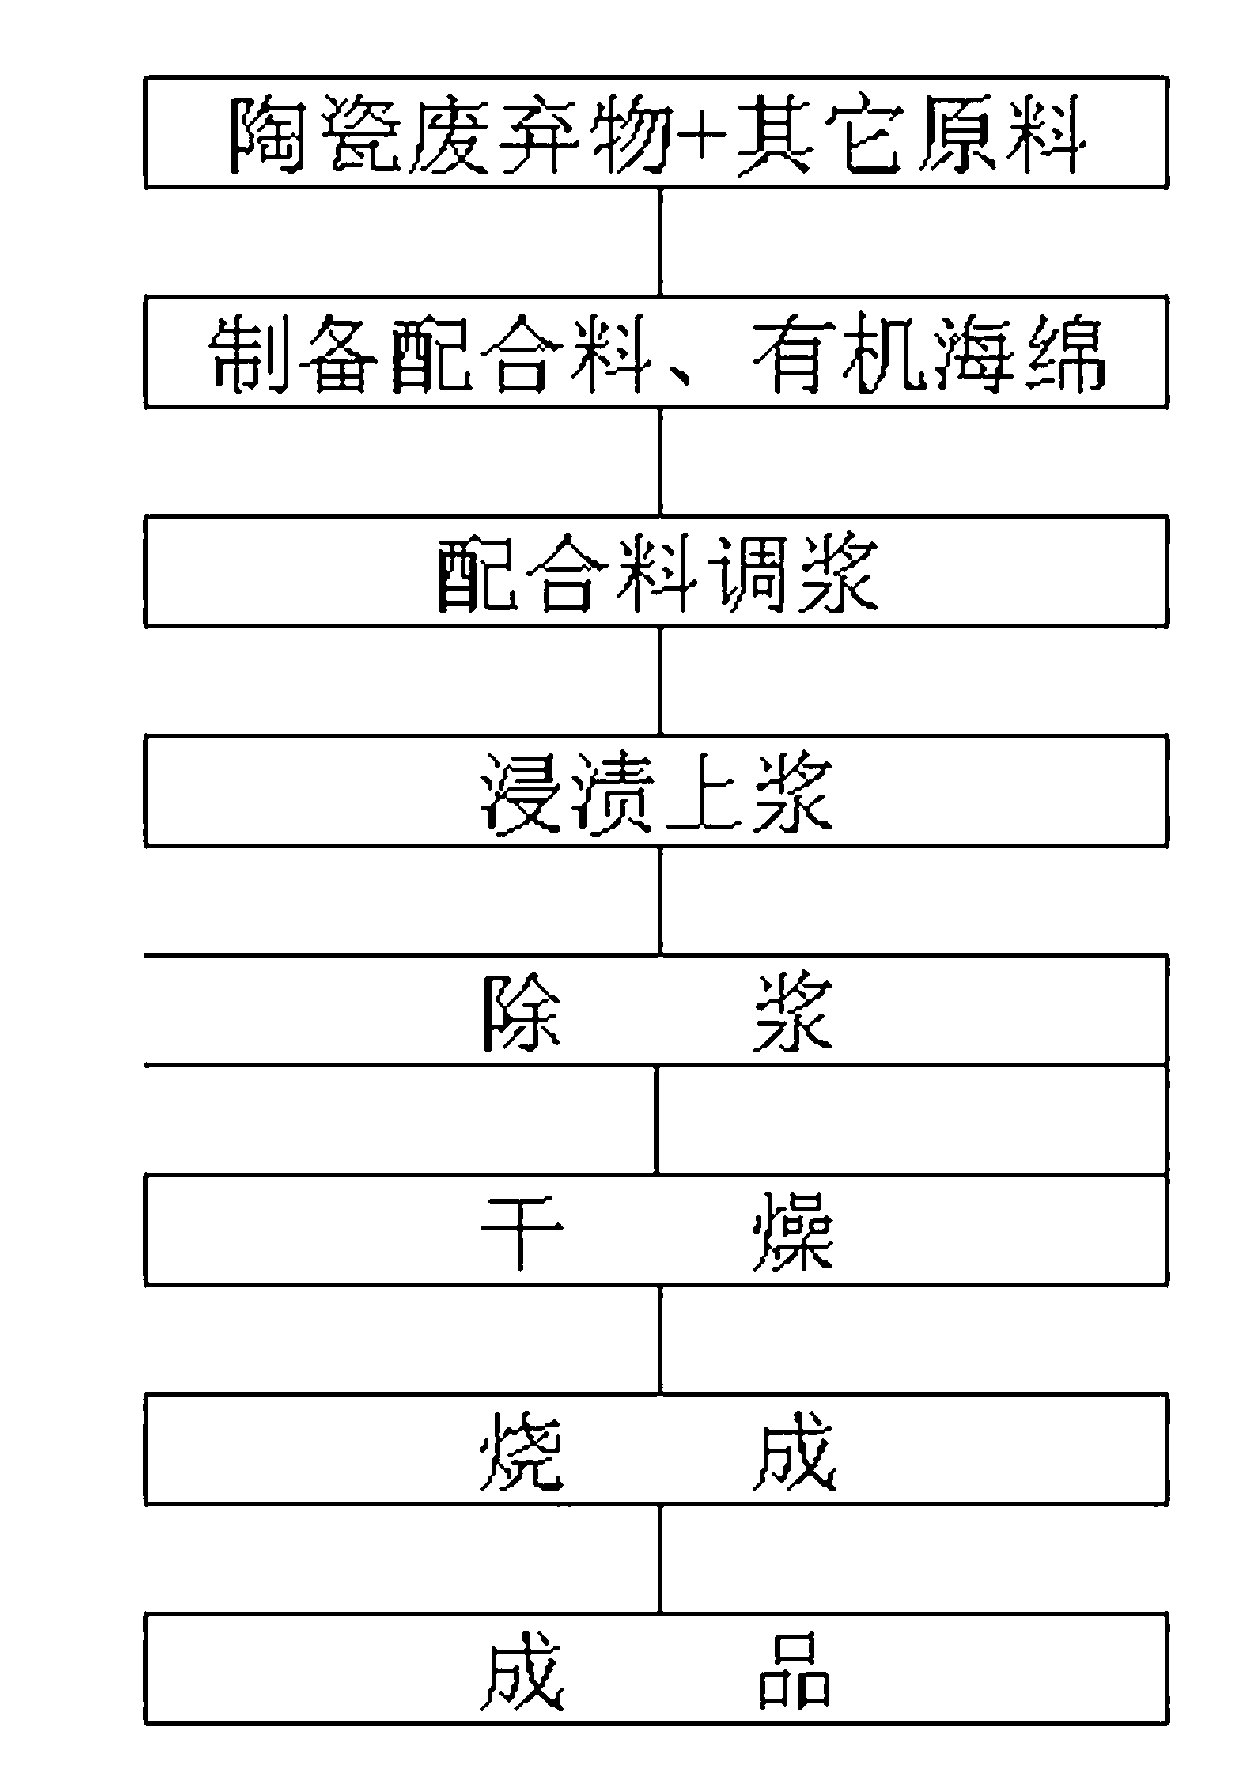 Foam sound absorption material produced by using ceramic waste and production method of foam sound absorption material